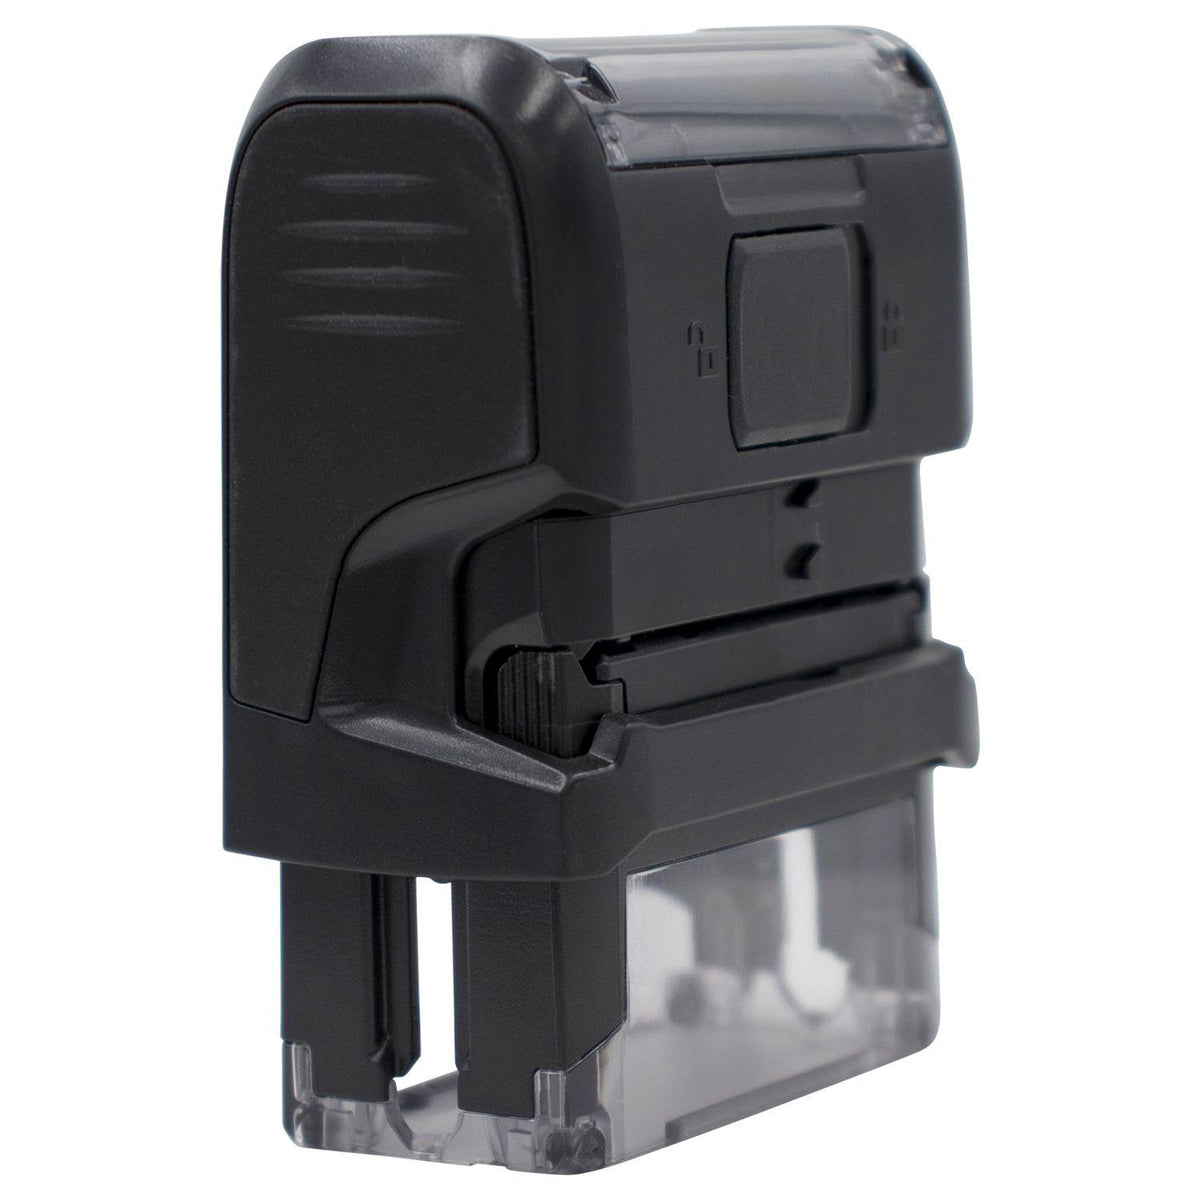 Self-Inking Standard Mail Stamp - Engineer Seal Stamps - Brand_Trodat, Impression Size_Small, Stamp Type_Self-Inking Stamp, Type of Use_Postal &amp; Mailing